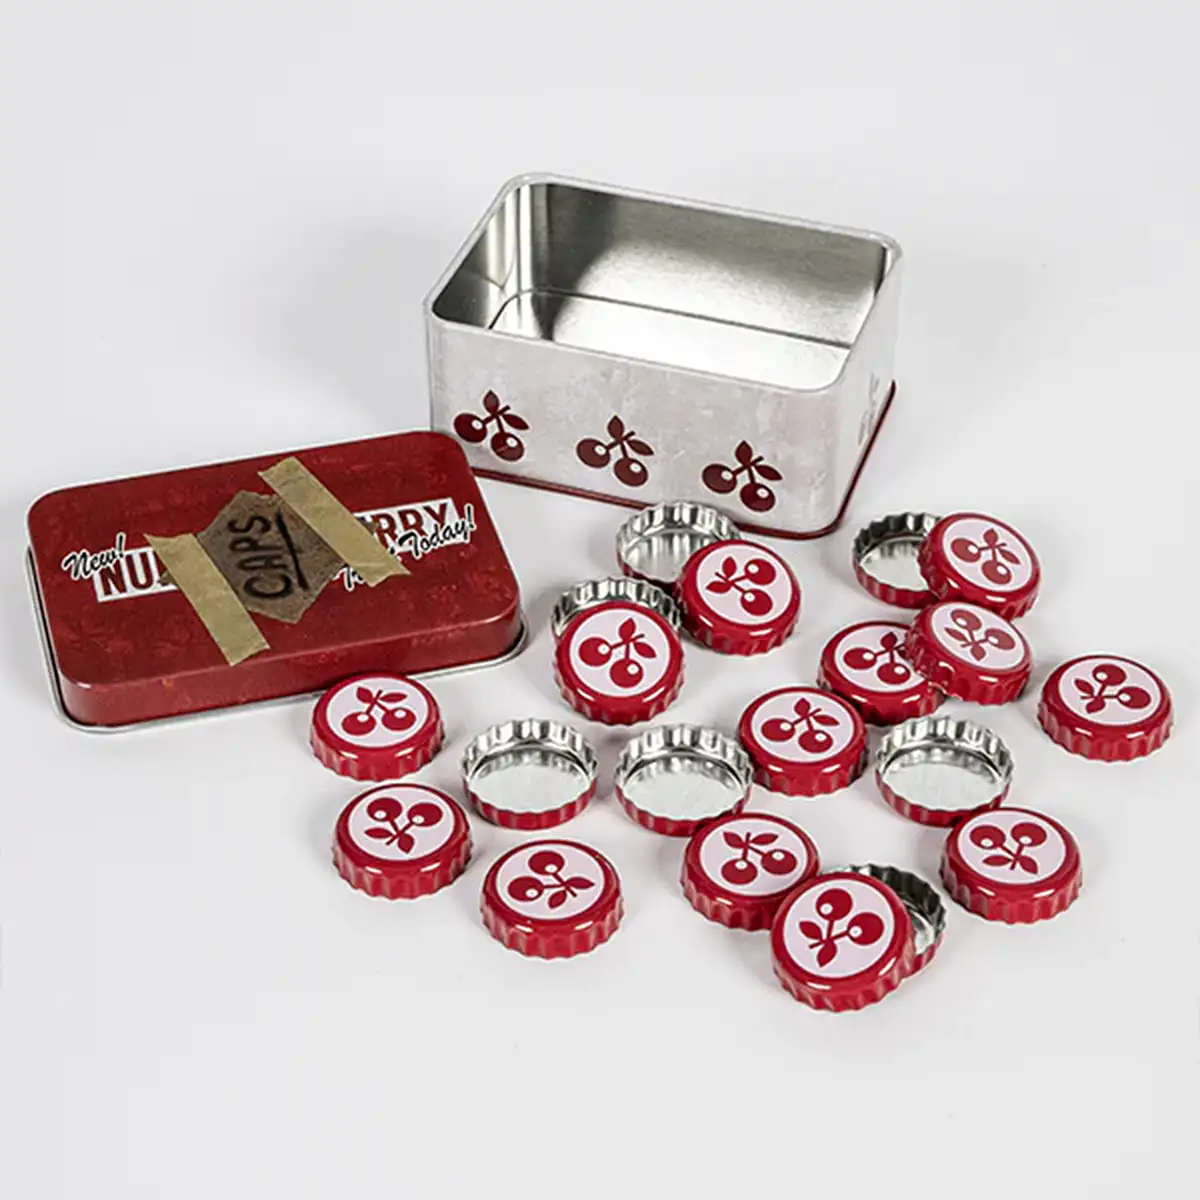 Fallout Bottle Cap Series "Nuka Cola Cherry" with Collection Tin Image 2